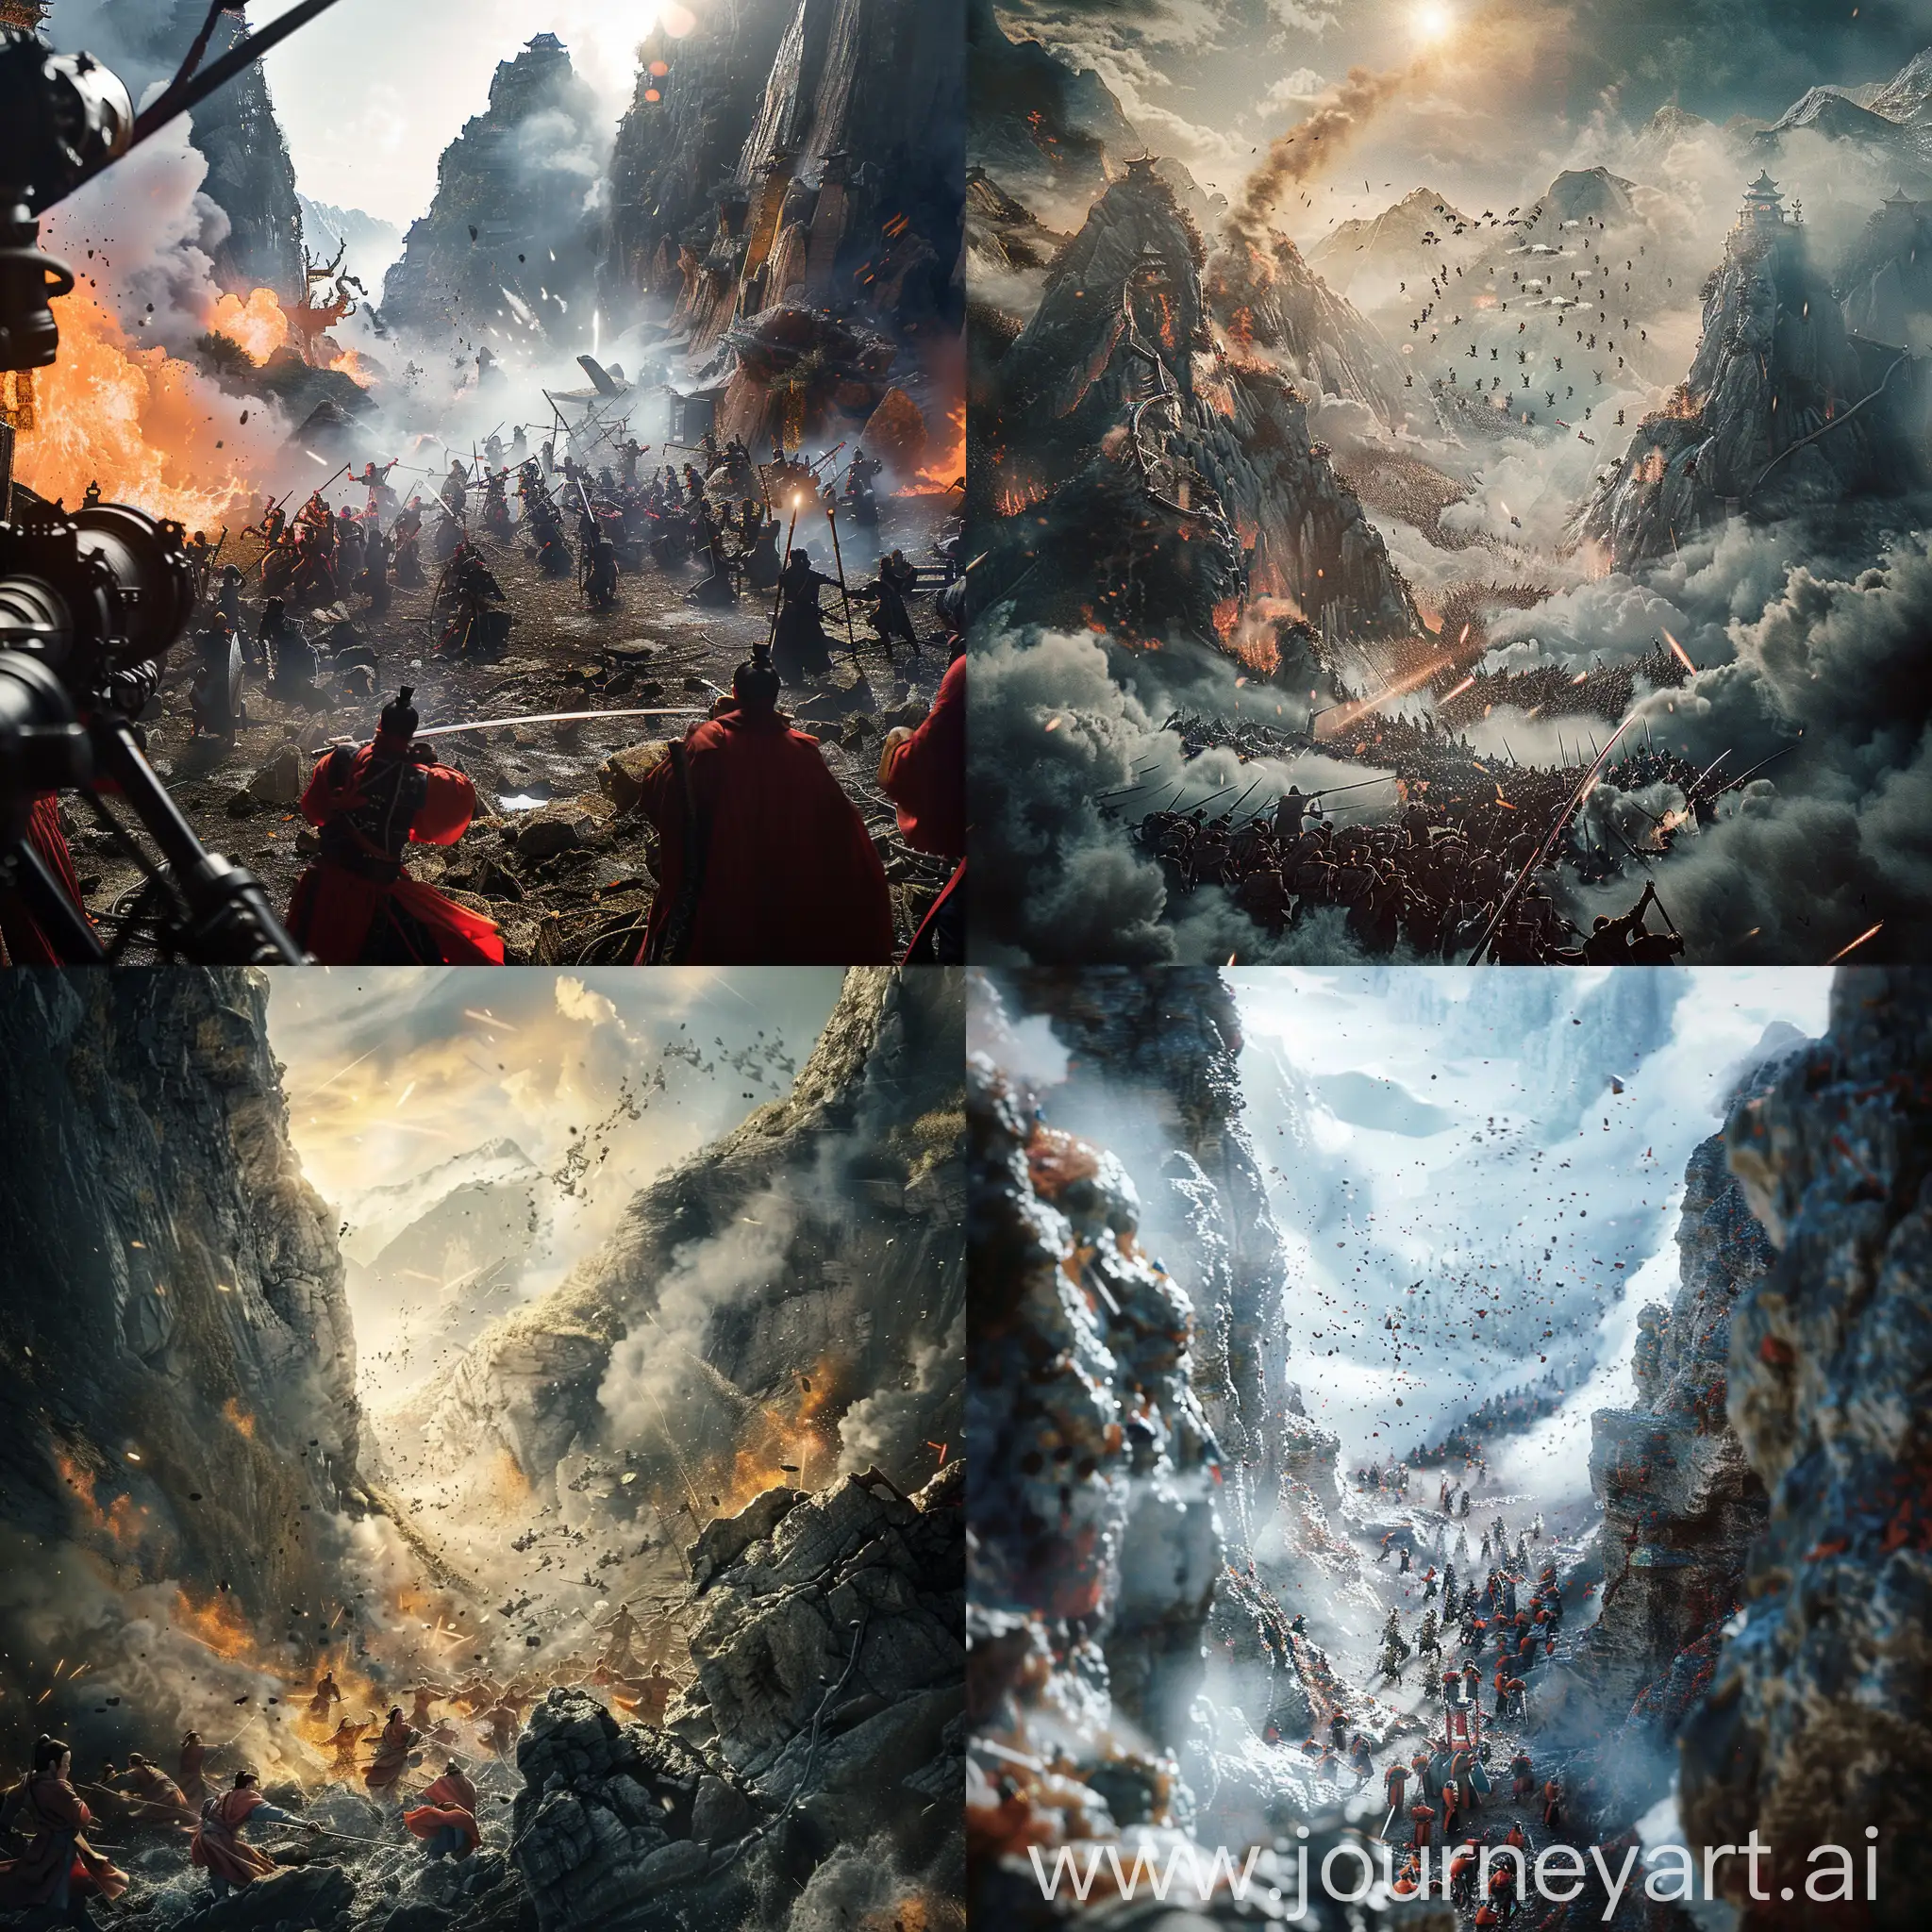 masterpiece, best quality, The Godly Sword Sect and the Azure Cloud Sect are trapped between two mountains, surrounded by intense battle scenes, with cultivators fighting desperately, cinematic lens with (complex filed bokeh);